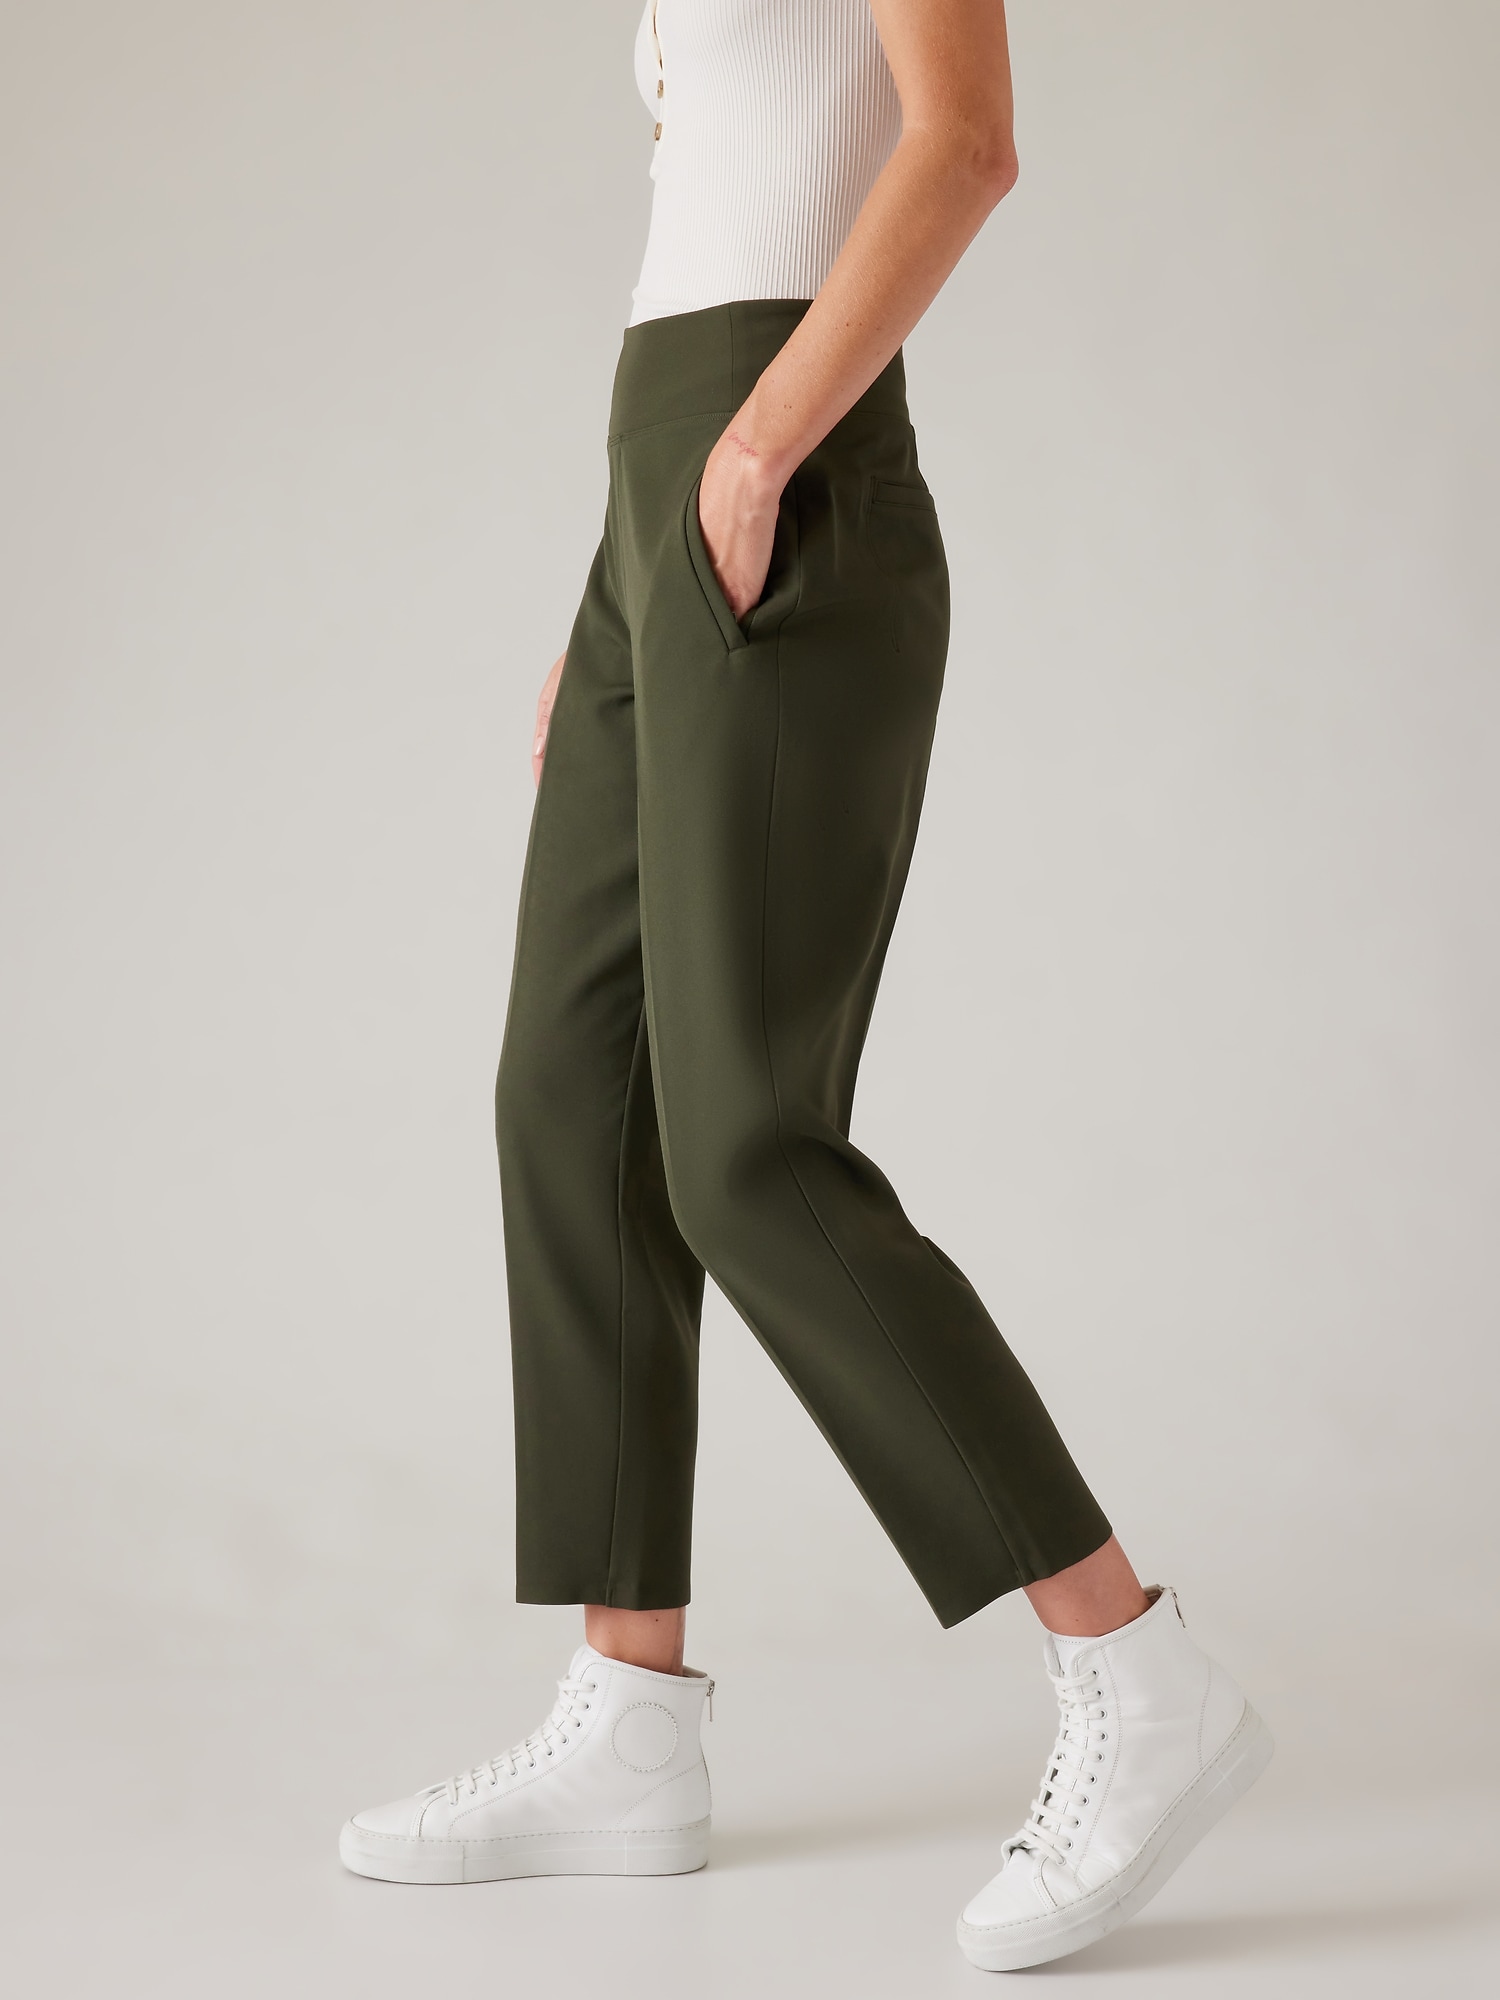 Athleta Relaxed Track Pants for Women